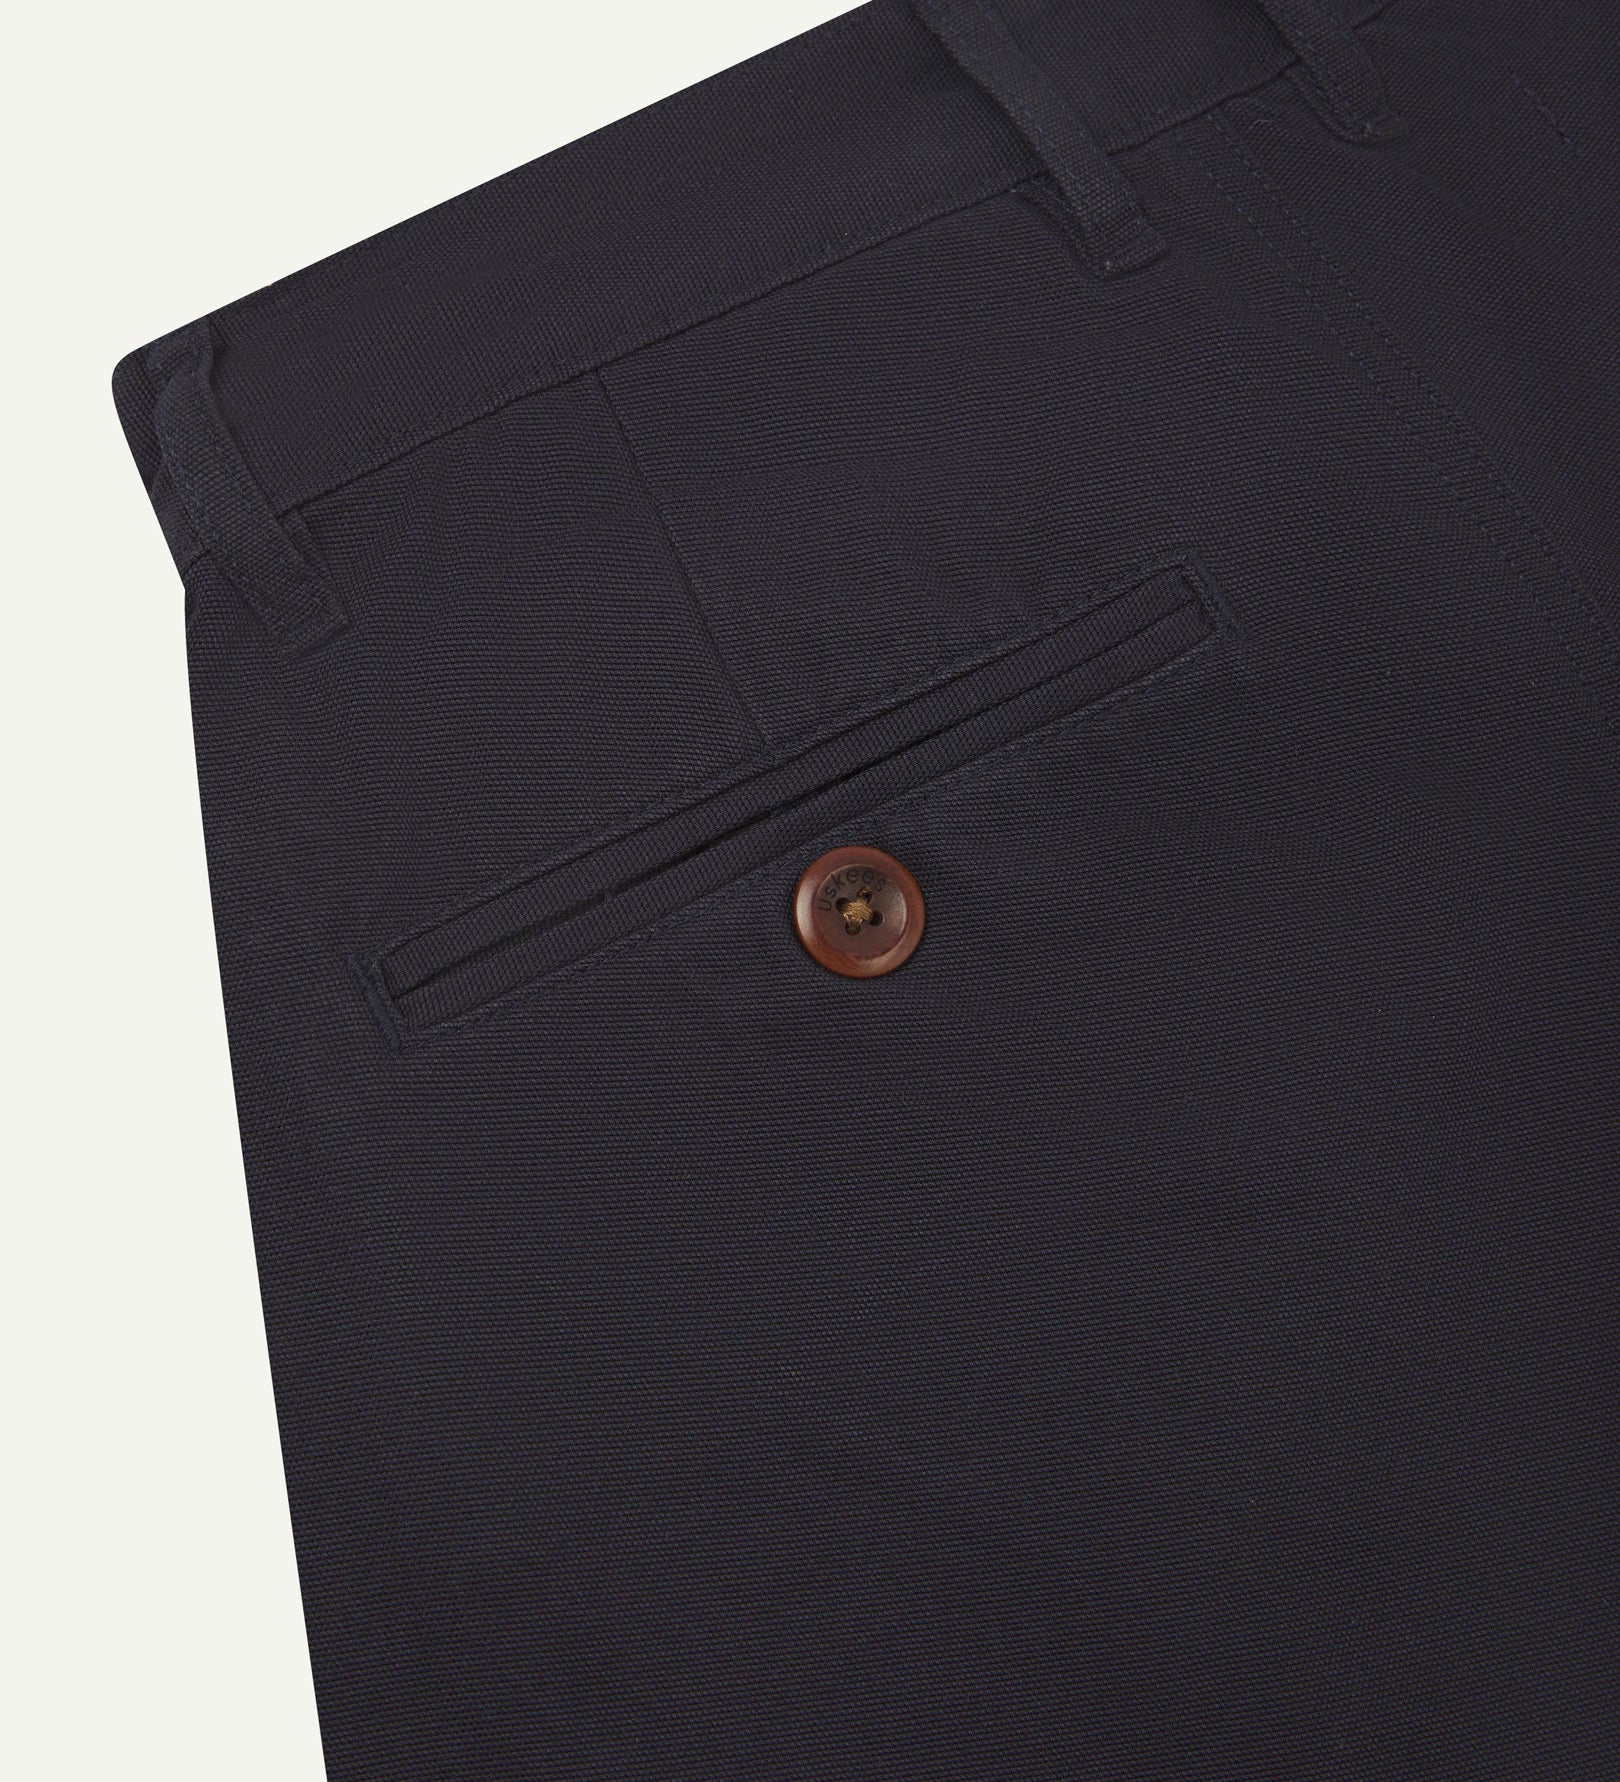 Back close-up view of 5018 Uskees men's organic mid-weight cotton boat trousers in acid midnight blue showing belt loops and buttoned back pocket.